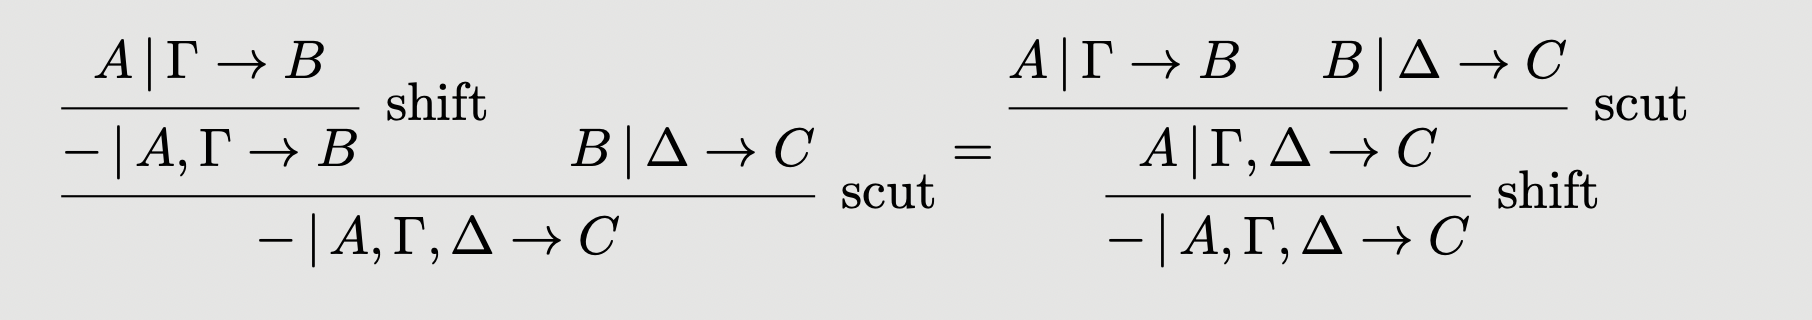 Example of an equation imposed on the sequent calculus of skew multicategories